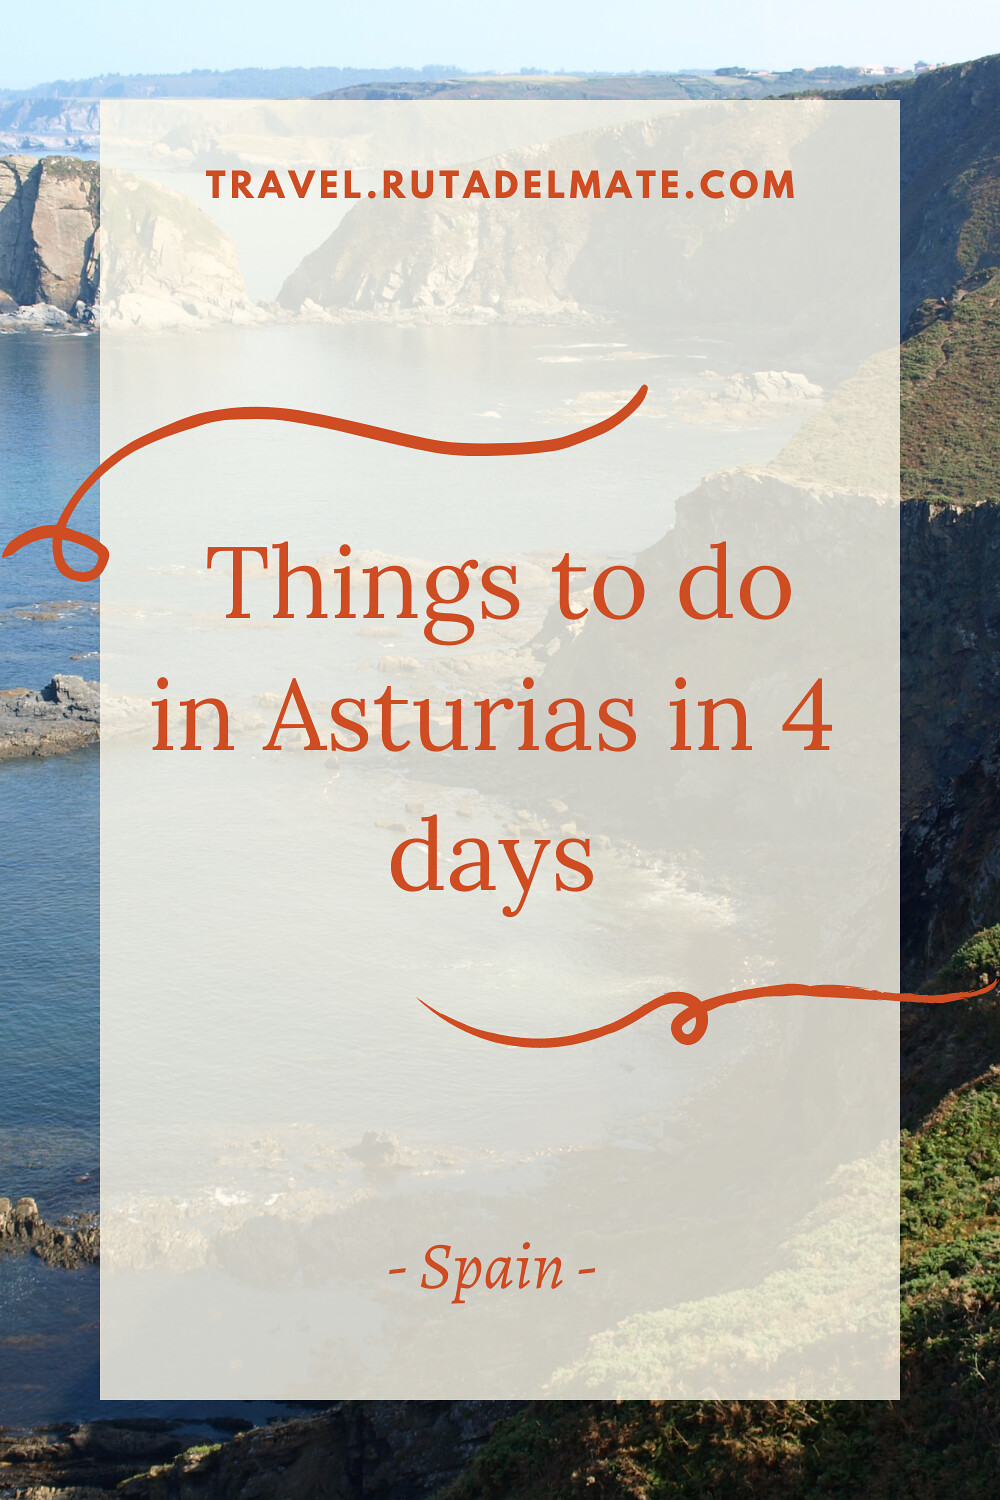 Things to do in Asturias in 4 days